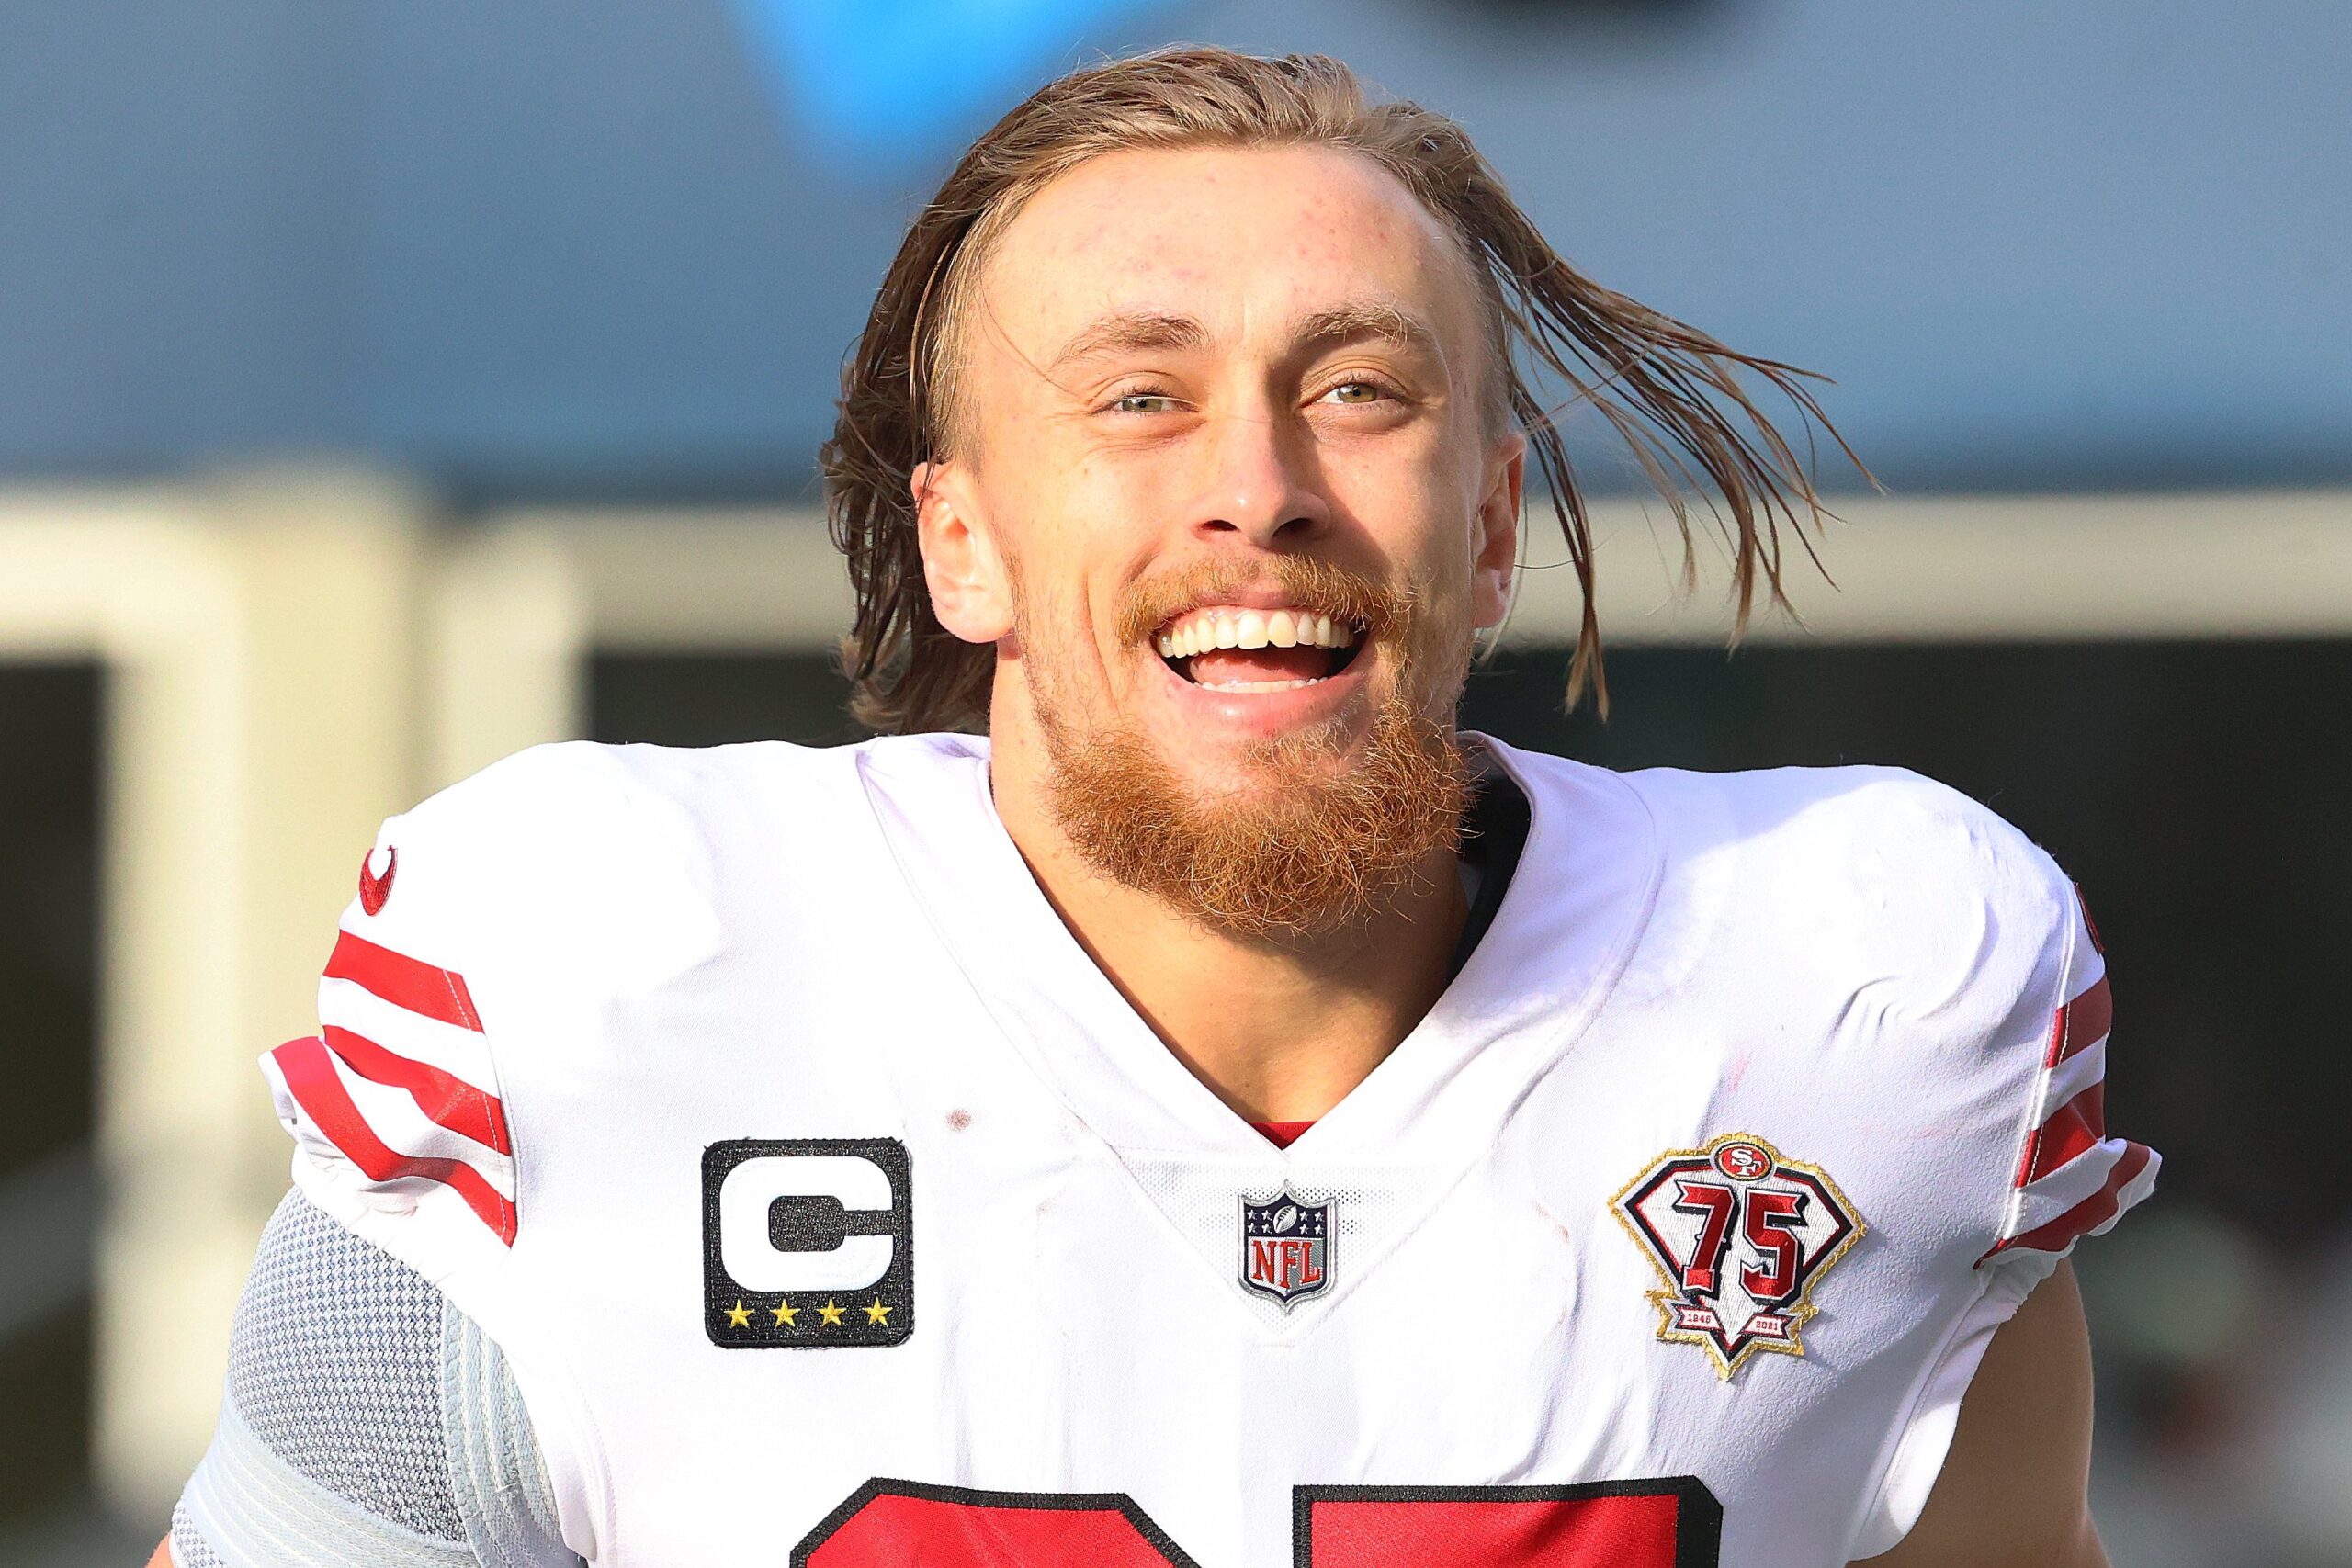 Footballer George Kittle Wife: Who Is Claire Kittle? Details About Their Married Life And Relationship History